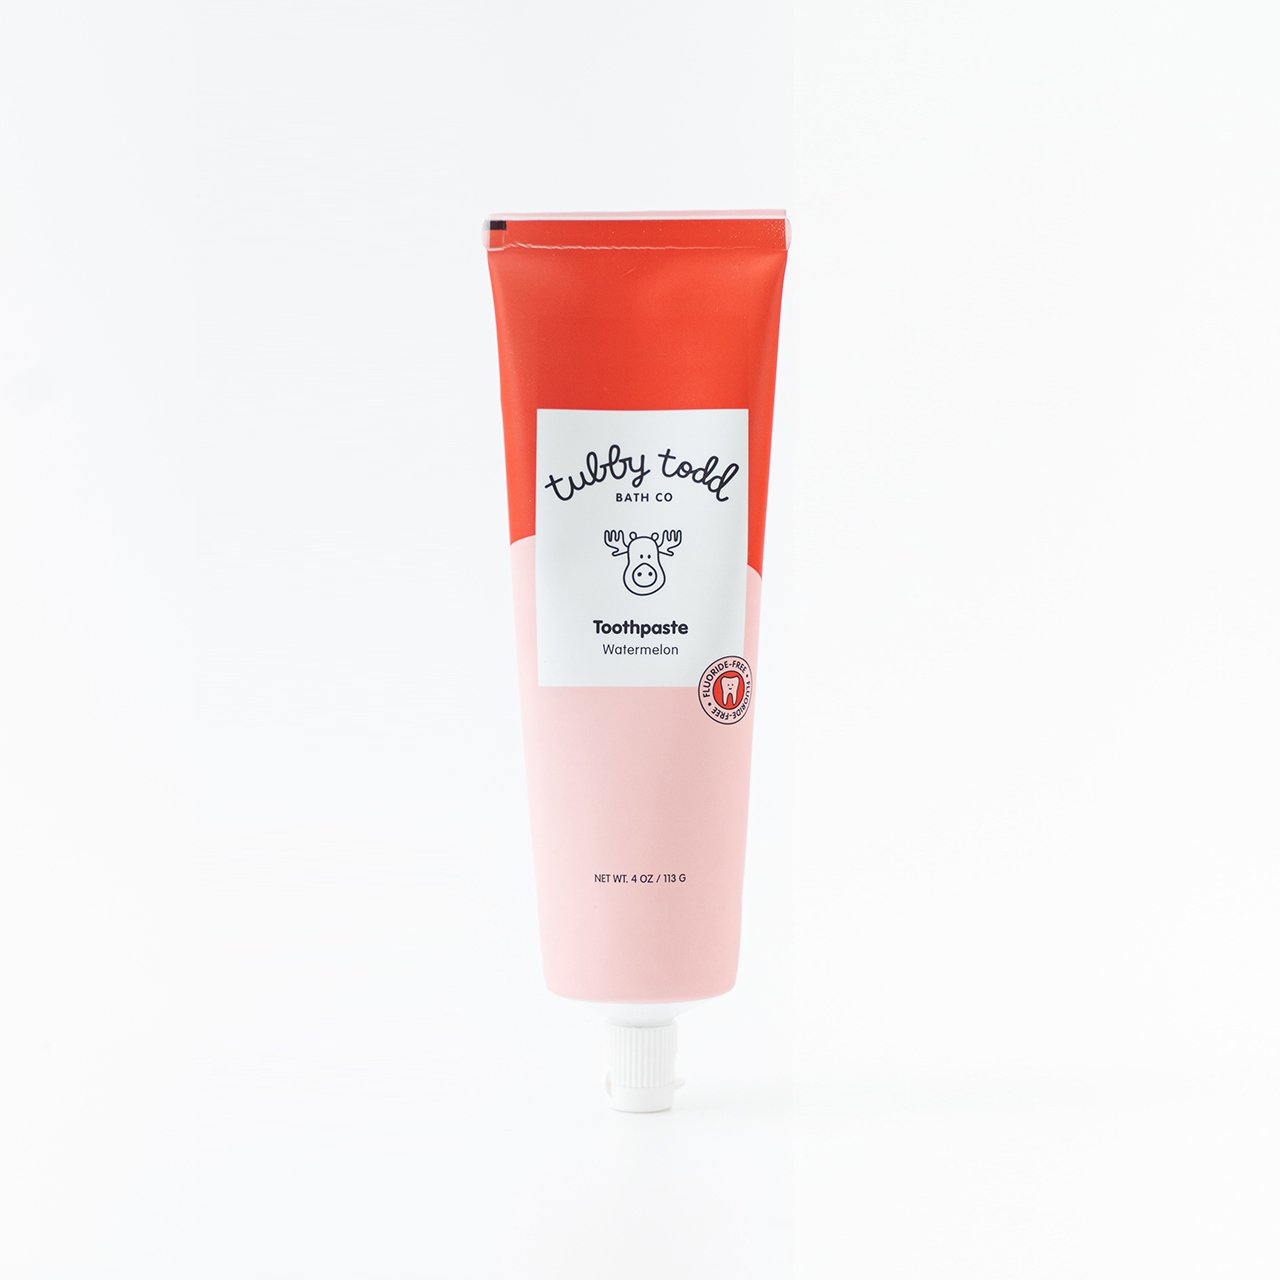 Watermelon Toothpaste 4oz tube product image